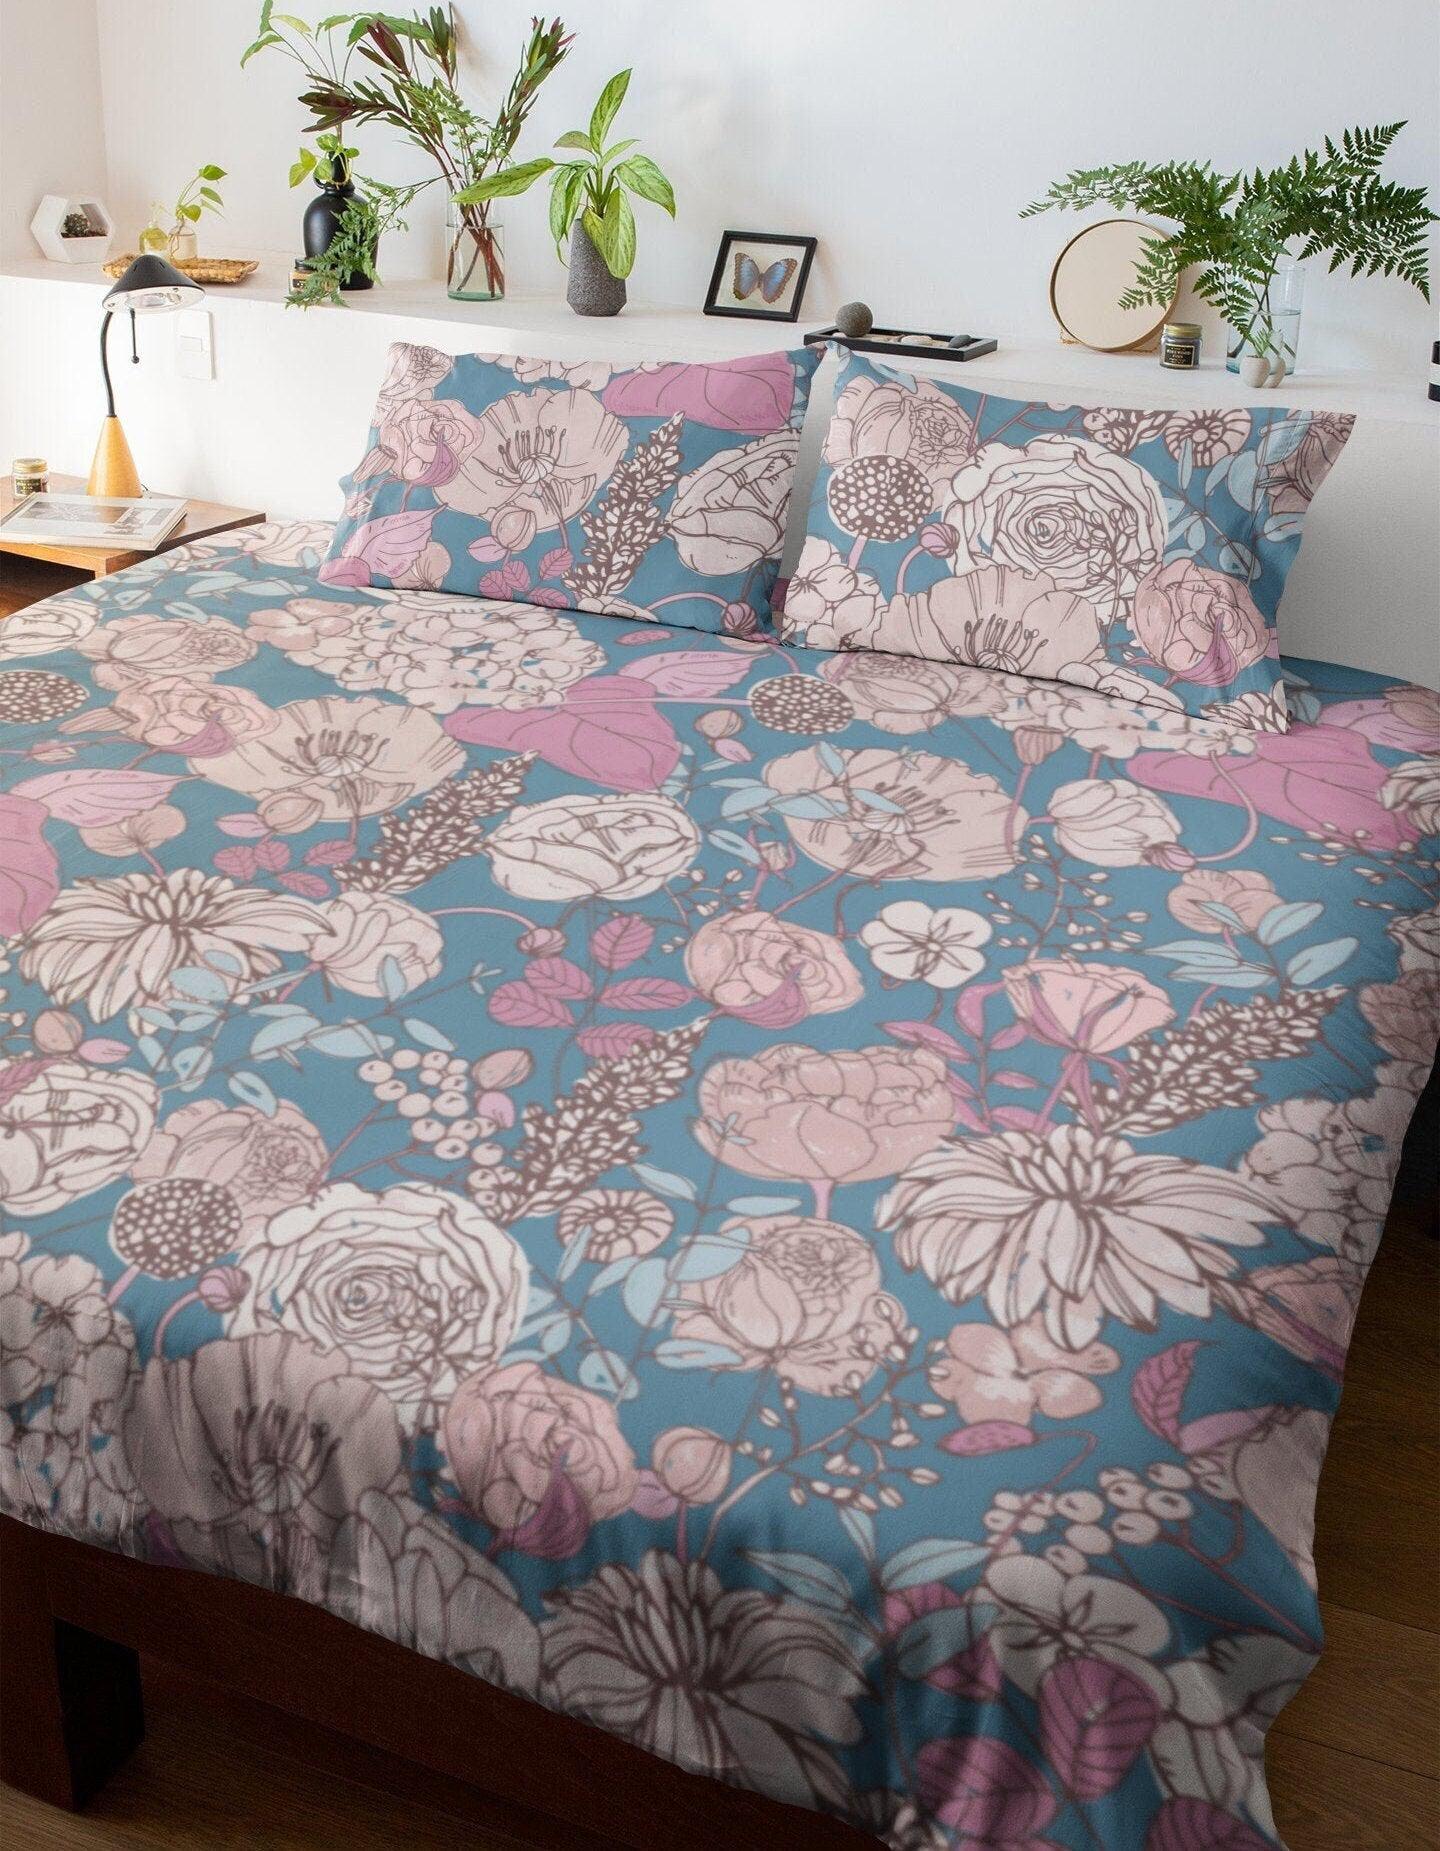 daintyduvet Blue Duvet Cover Set with Pink Hand drawn Flowers